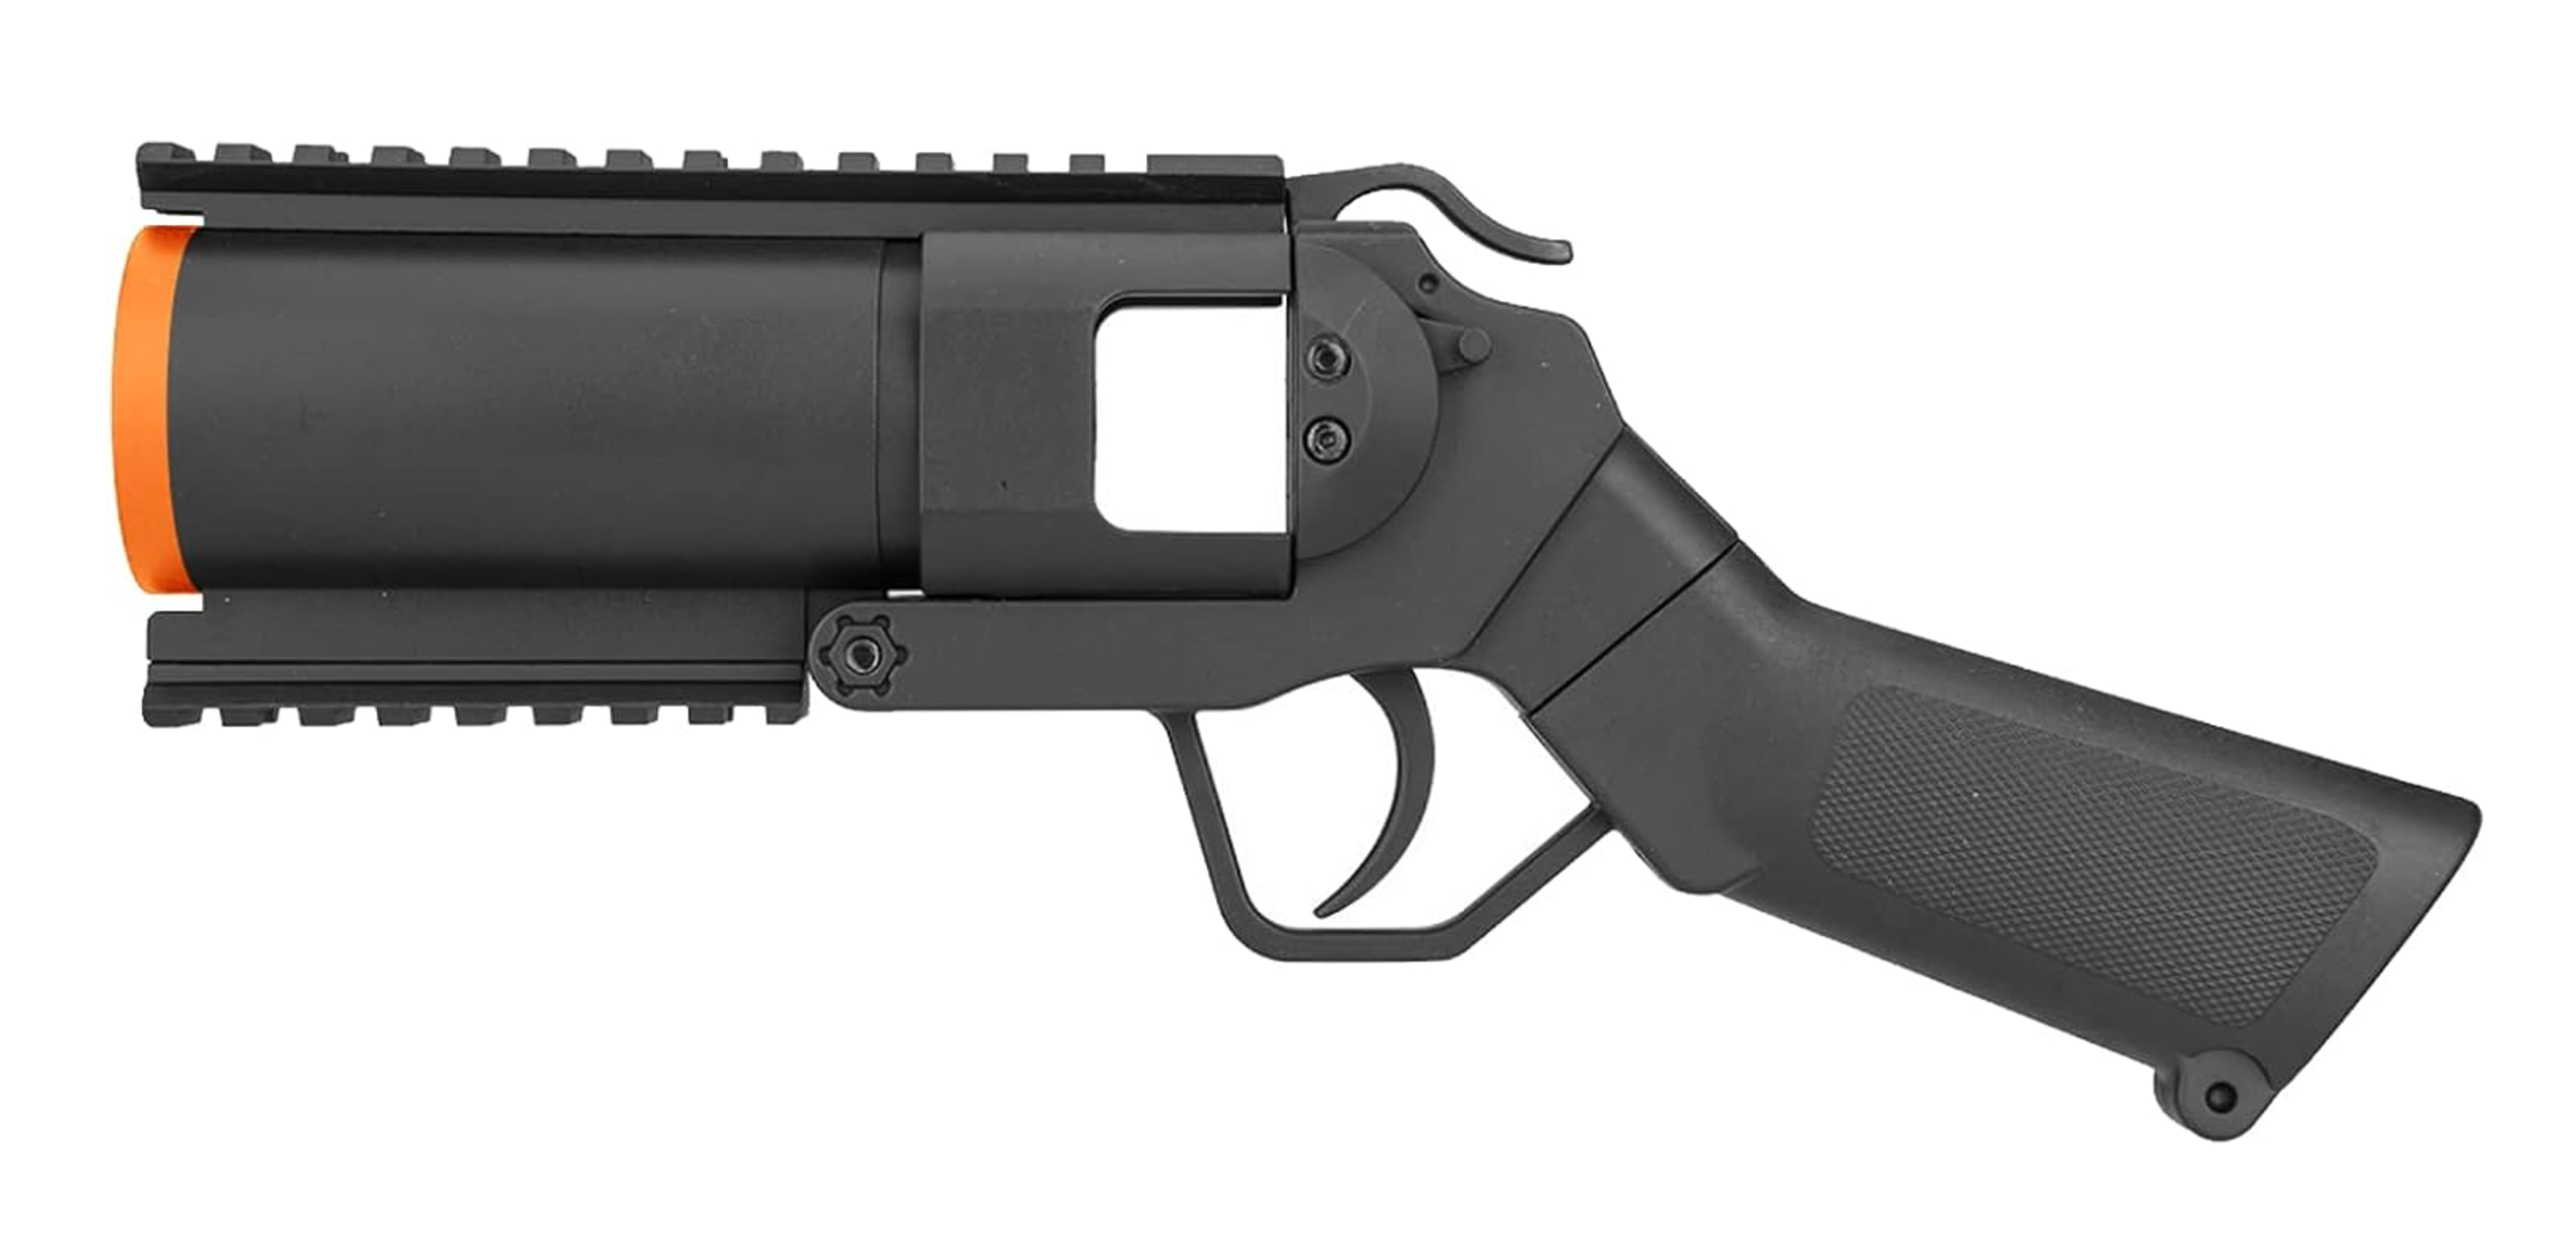 40MM Airsoft Grenade Launcher Pistol for Airsoft